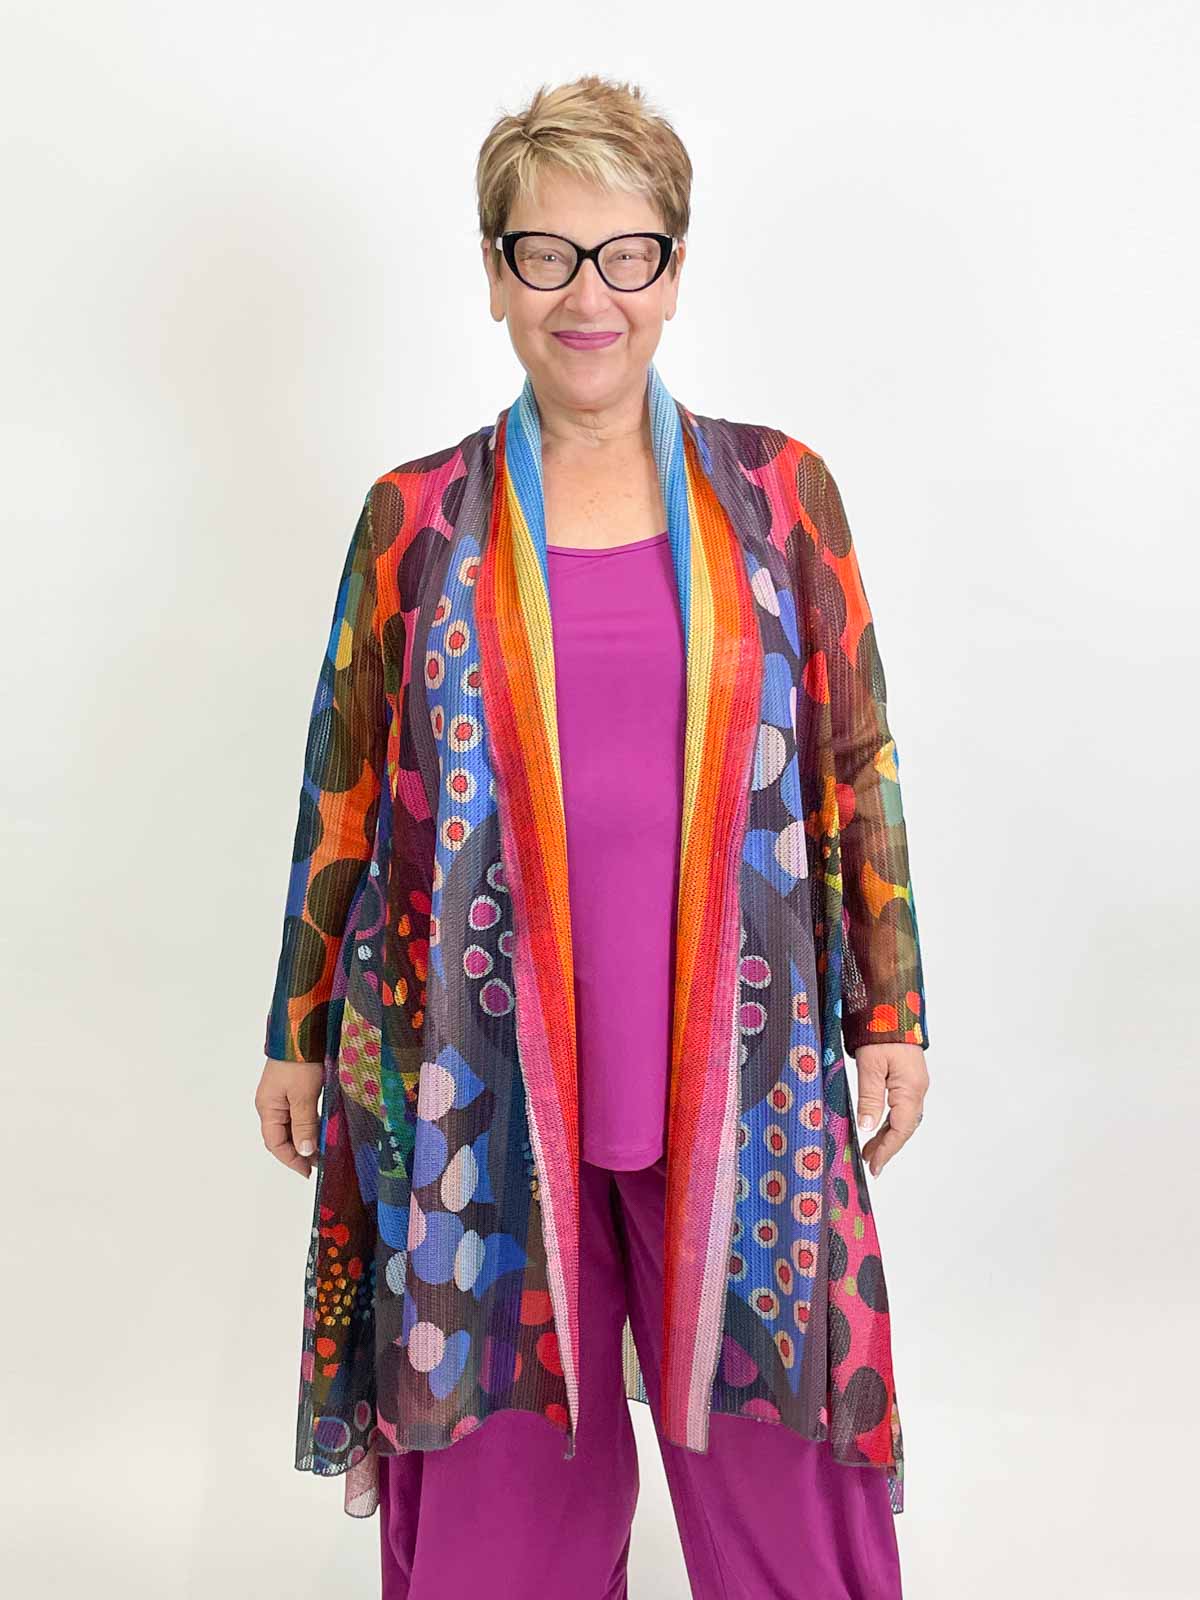 Kozan Limited Edition Molly Cardigan, Infinity - Statement Boutique